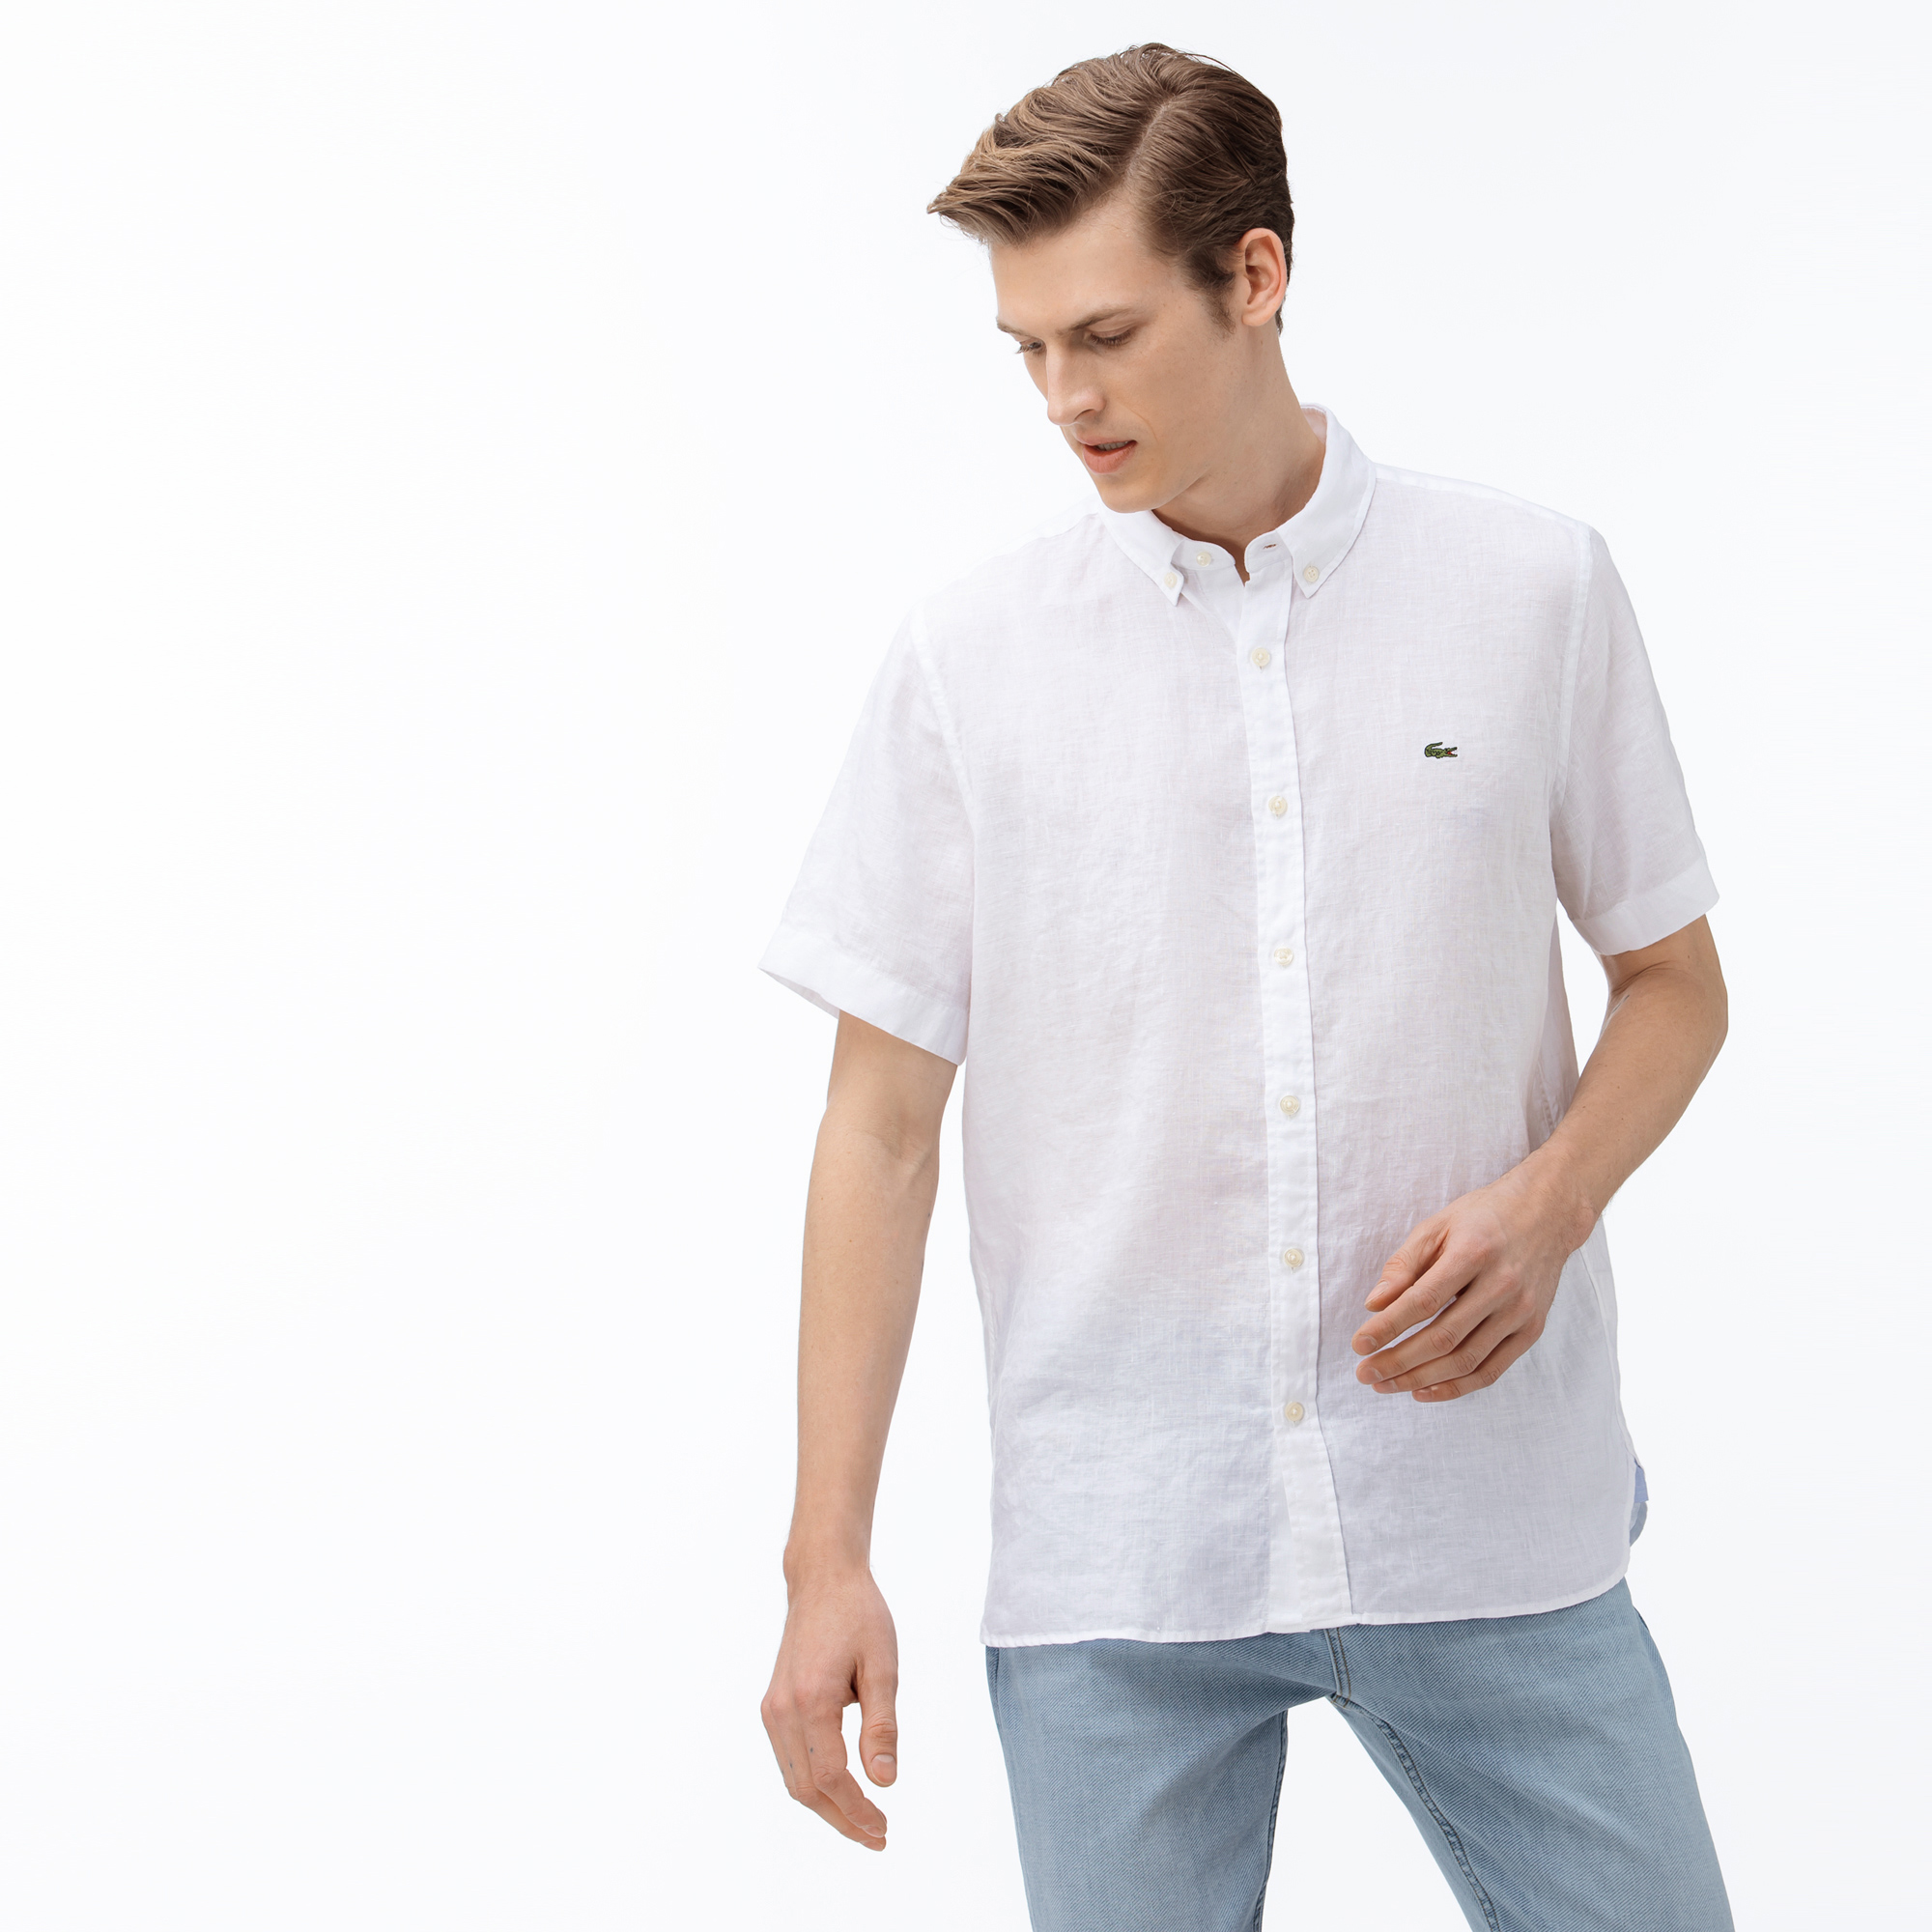 lacoste linen short sleeve shirt,Save up to 19%,www.ilcascinone.com